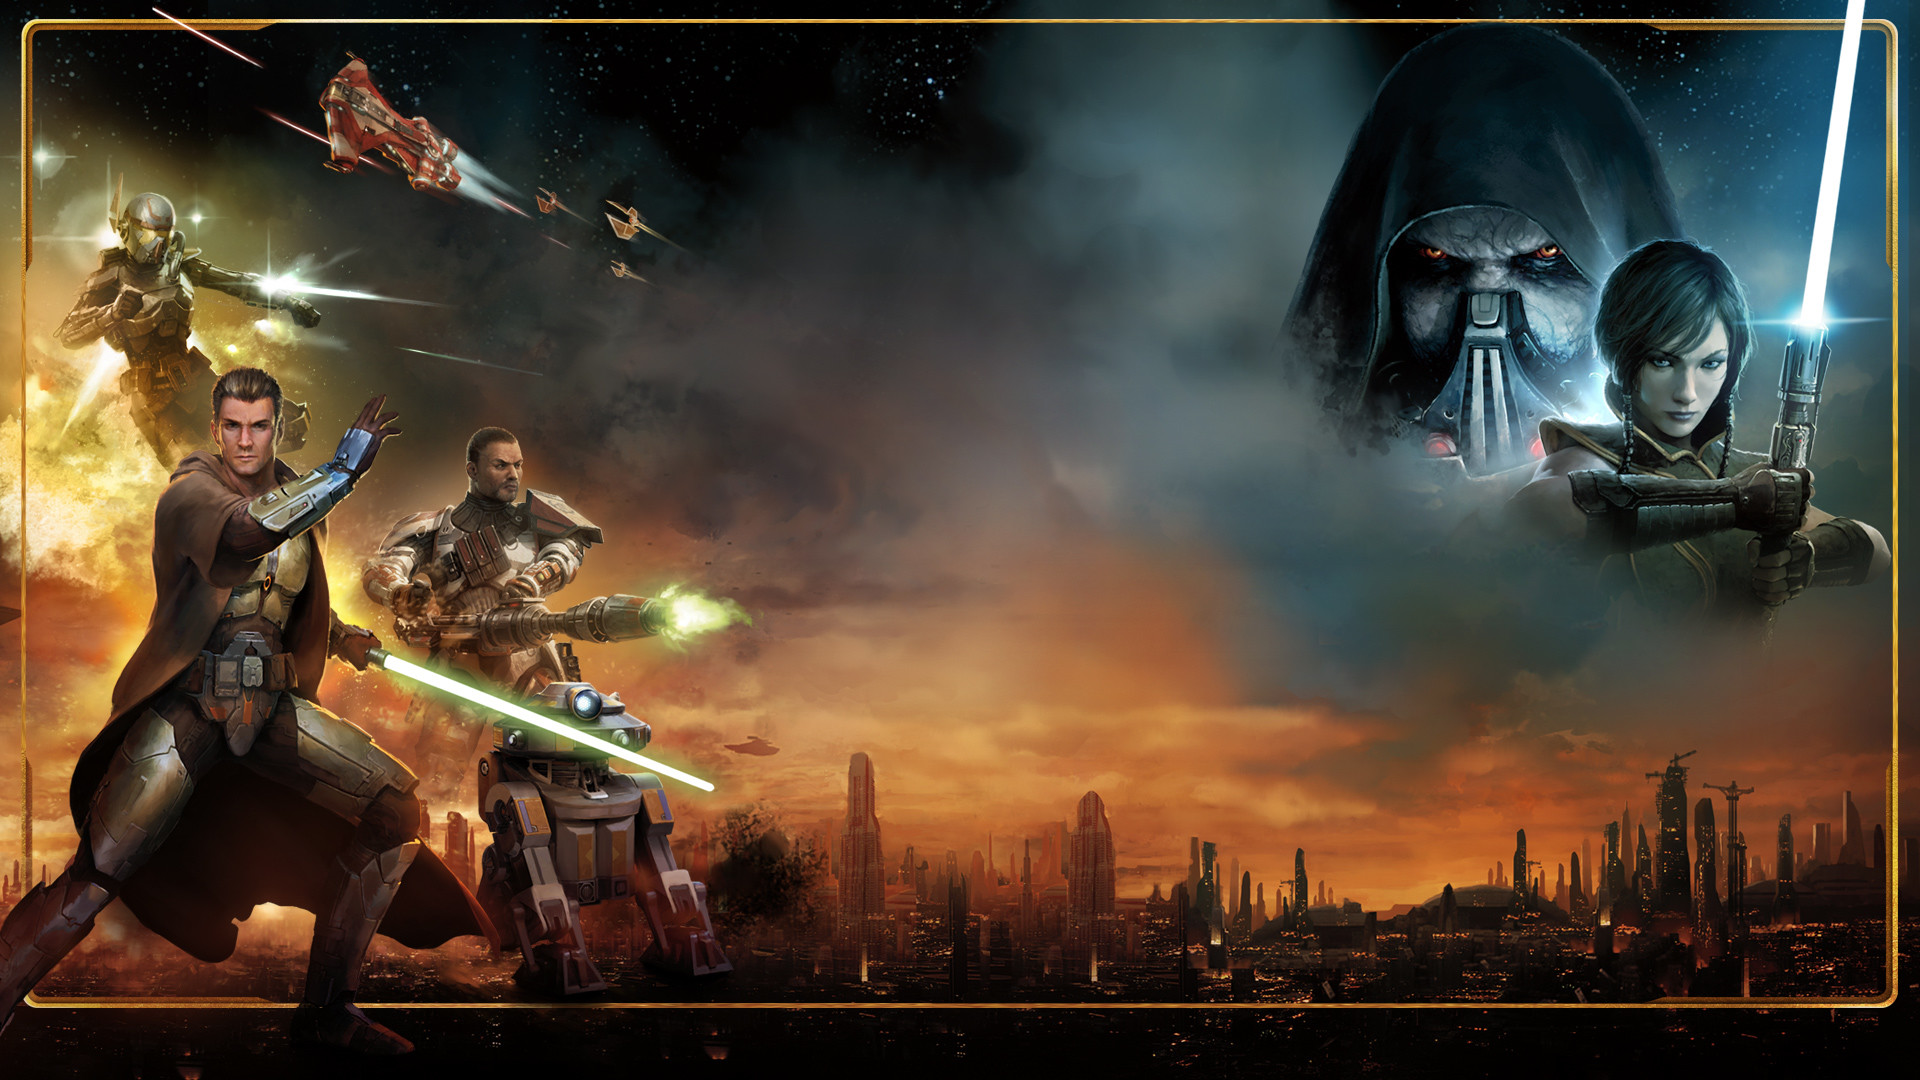 Download Swtor